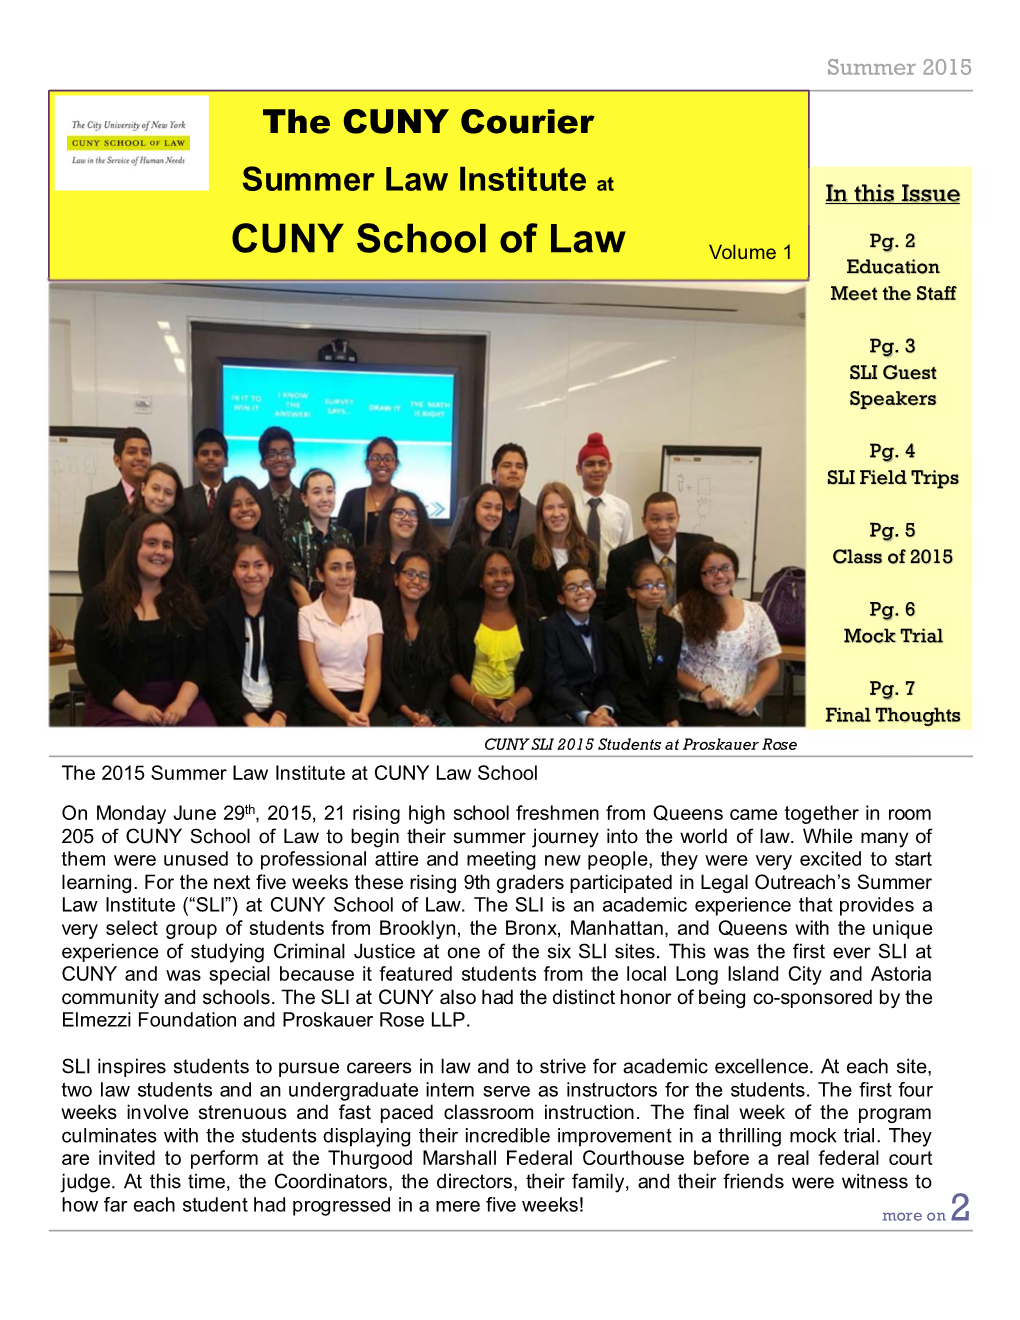 CUNY School of Law Volume 1 Education Meet the Staff